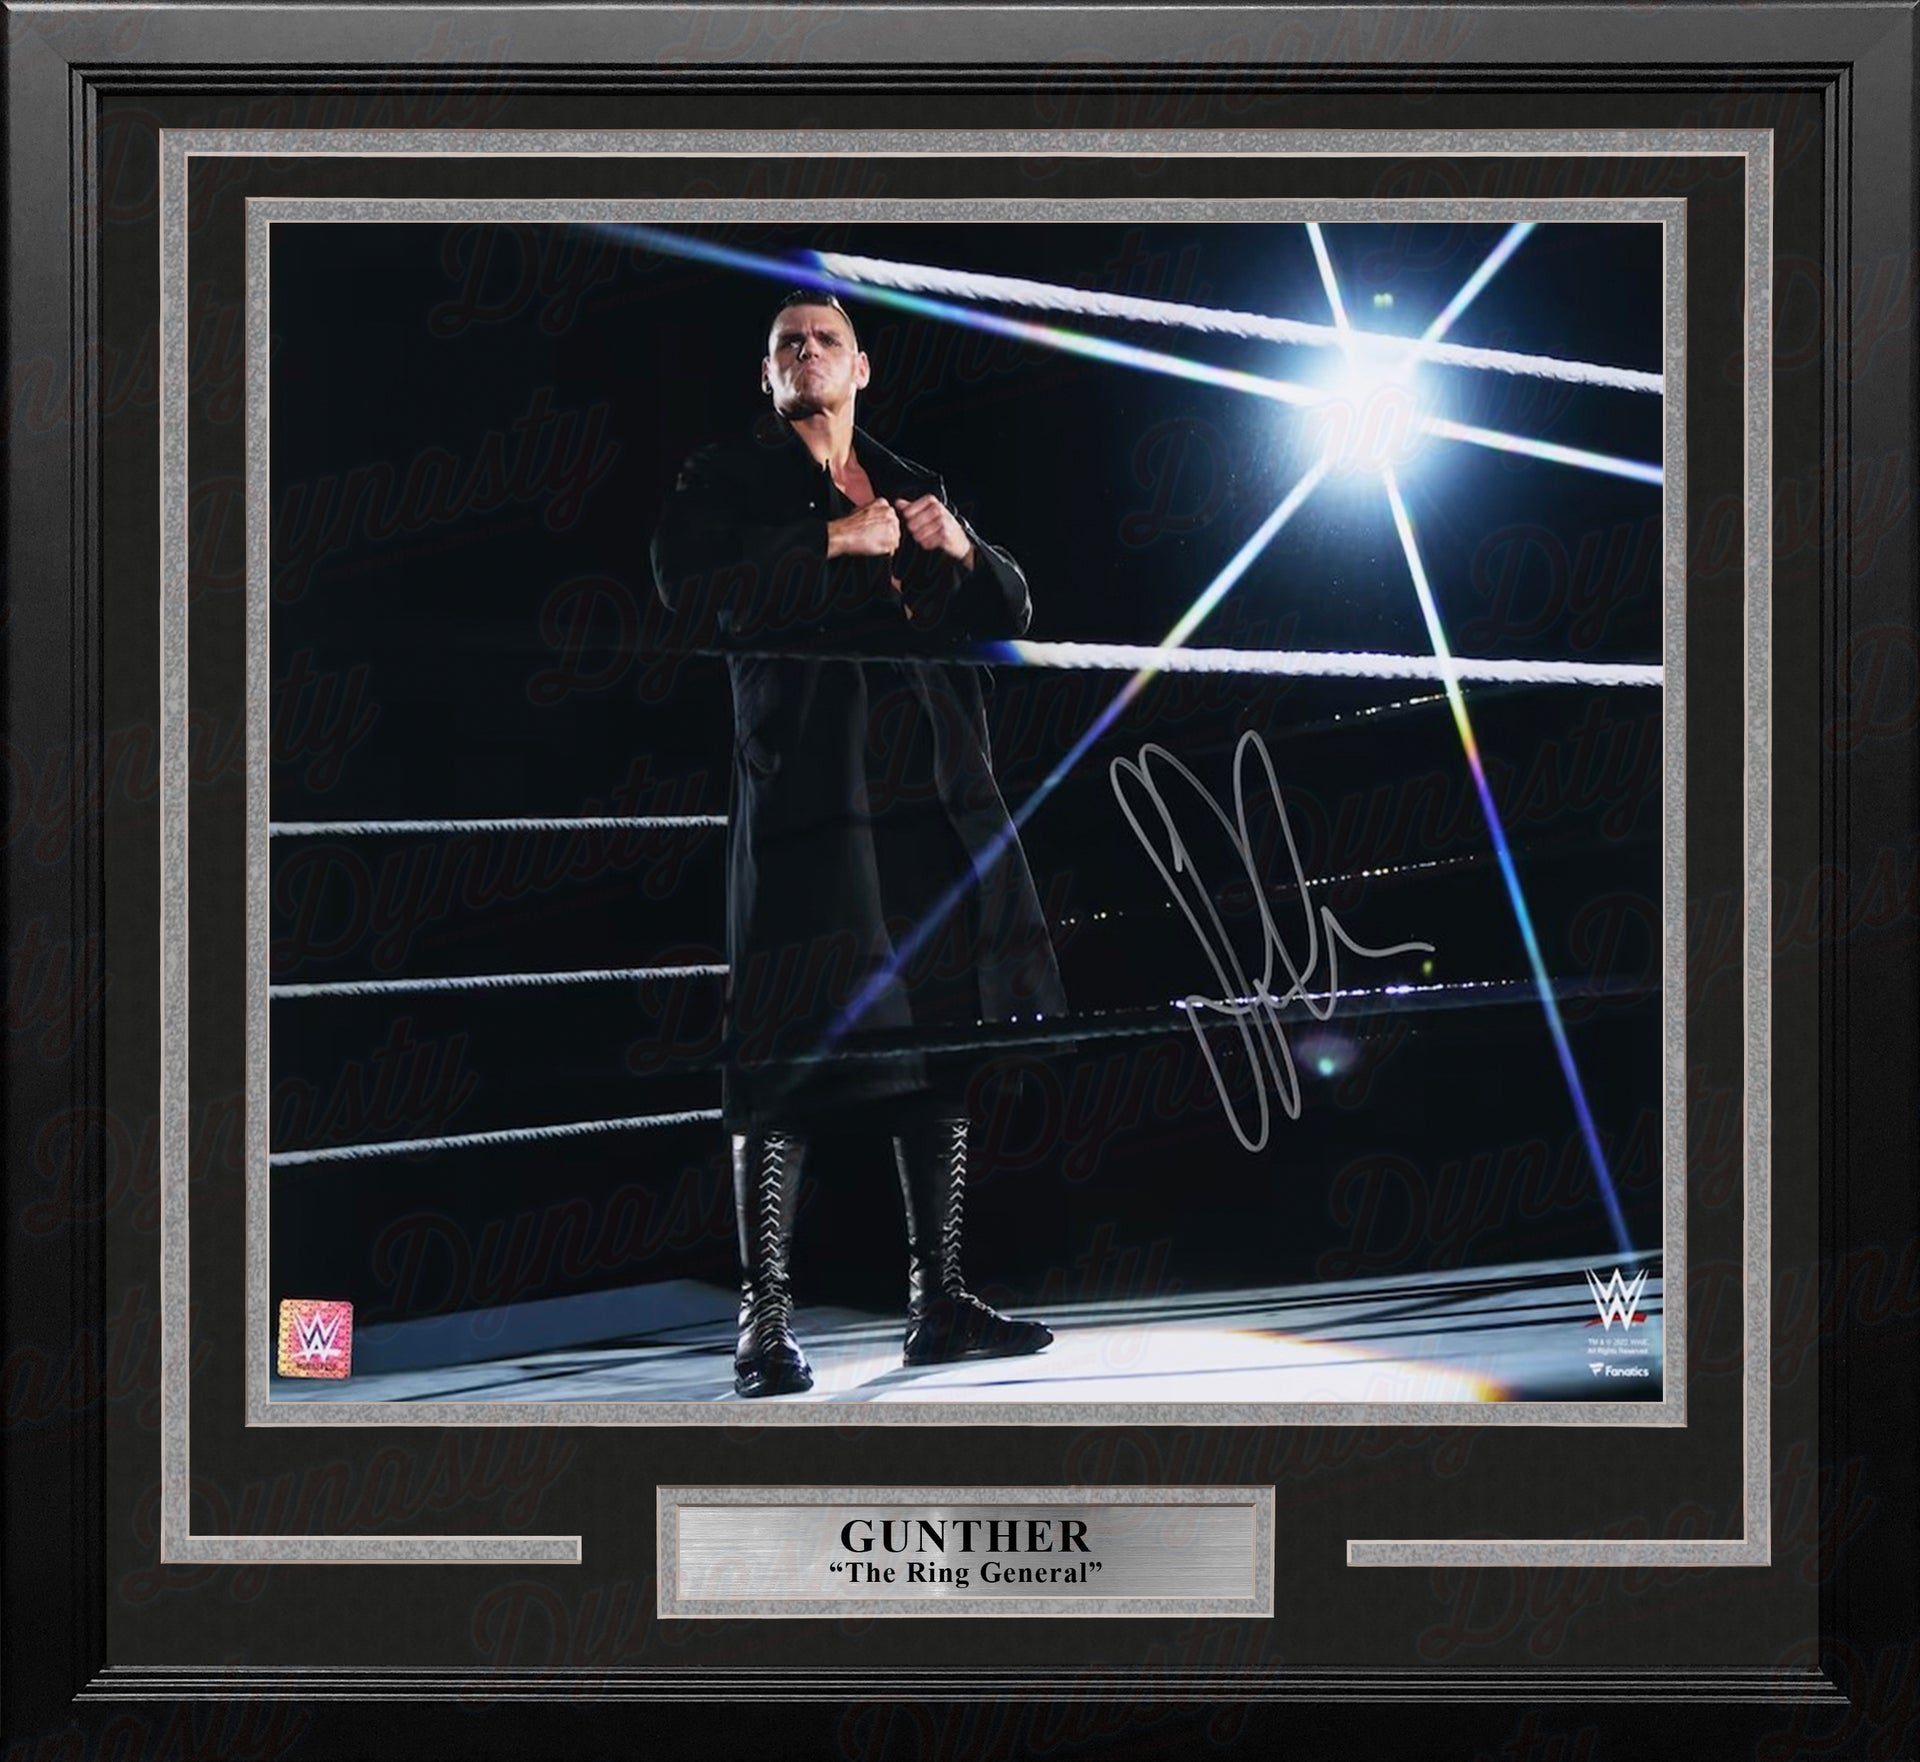 Gunther Standing in the Ring Autographed 16" x 20" Framed WWE Wrestling Photo - Dynasty Sports & Framing 